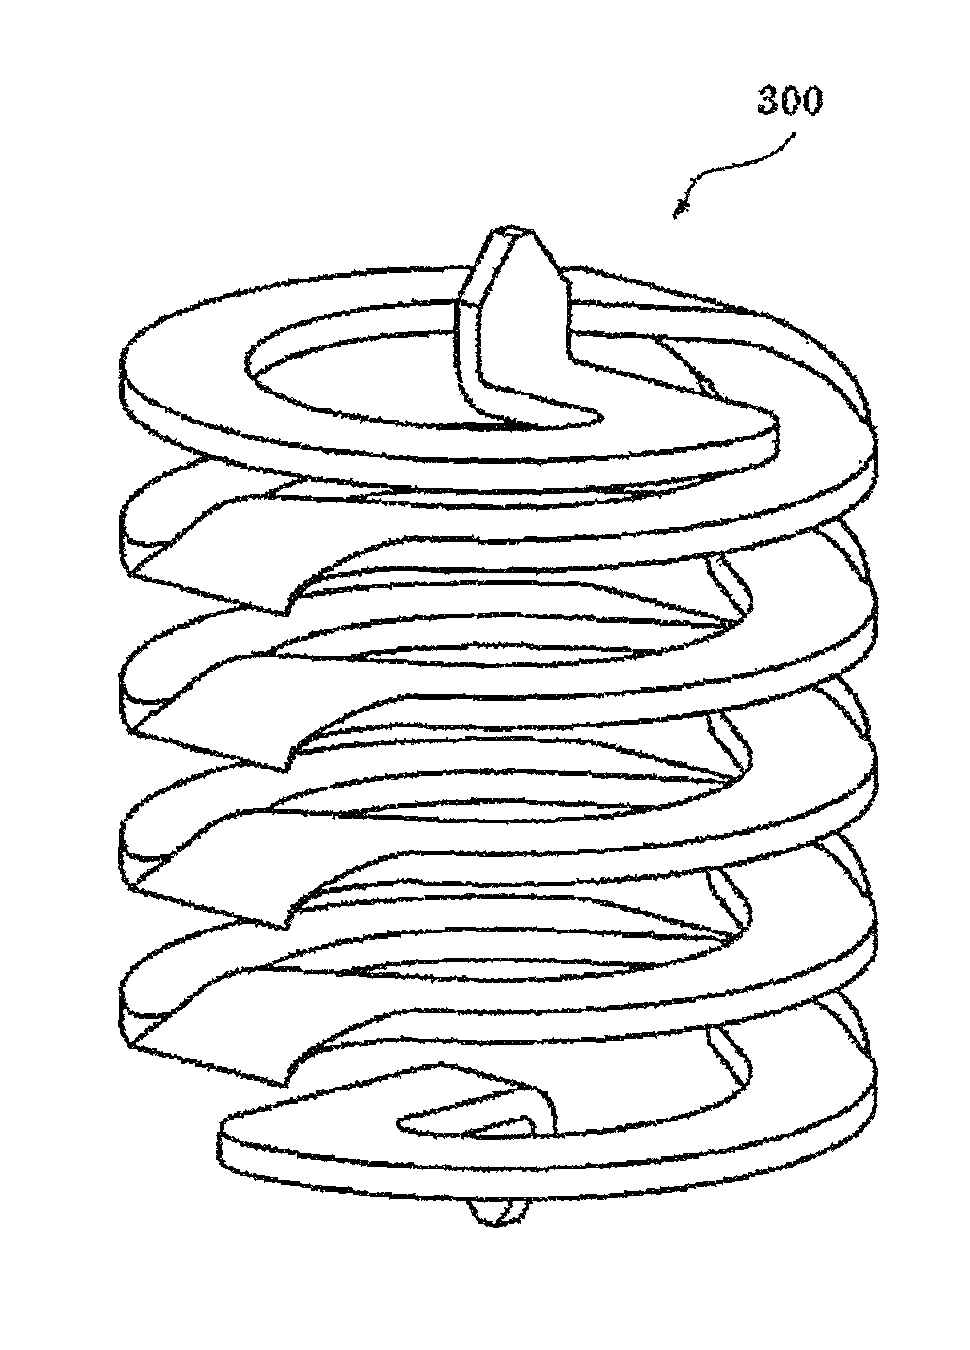 Flat plate folding type coil spring, pogo pin and manufacturing method